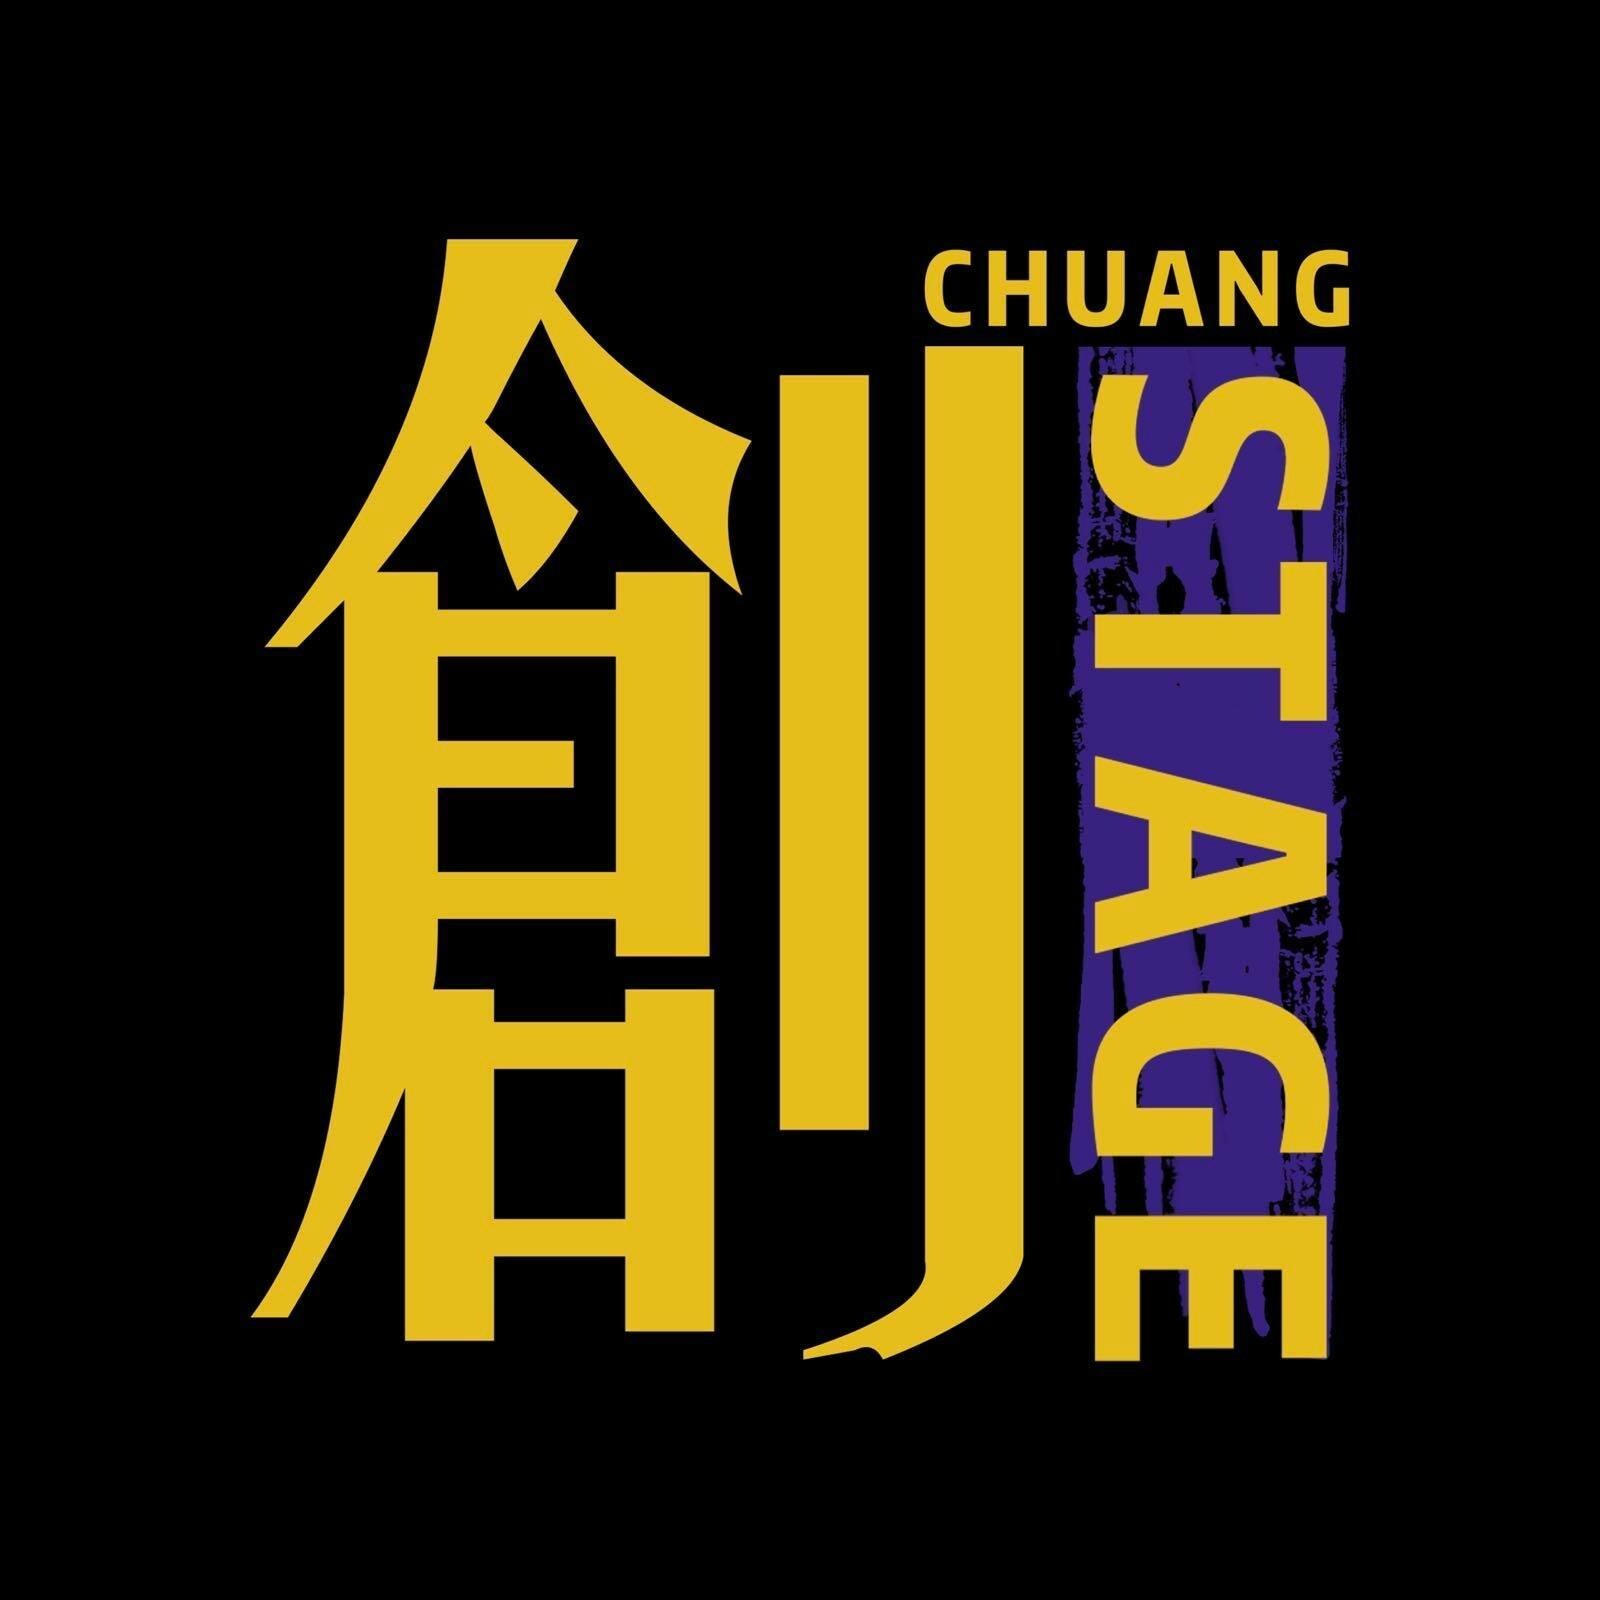 CHUANG Stage logo.